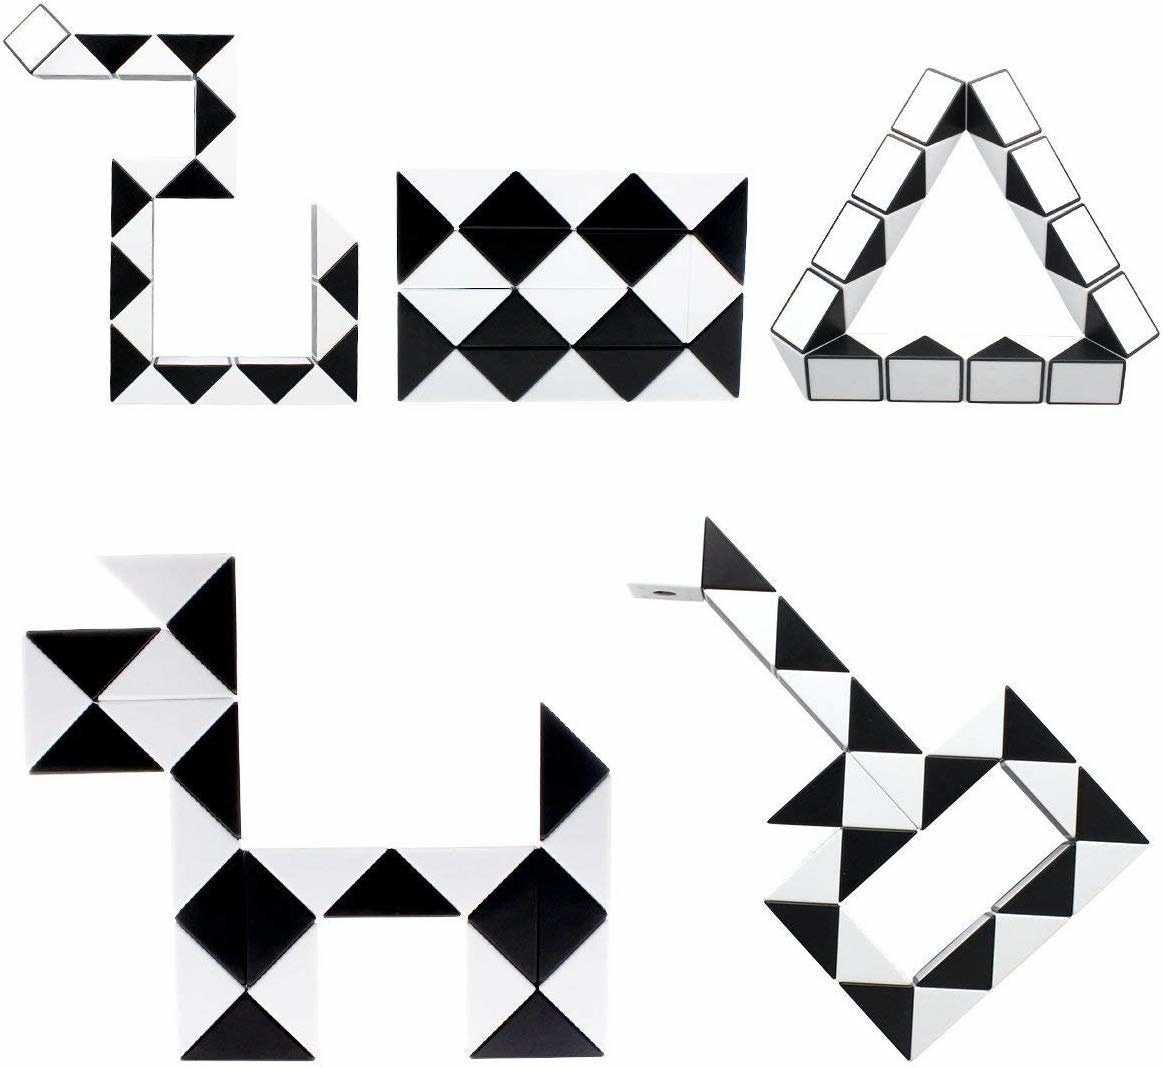 A twist puzzle you can turn and shape into infinite patterns.